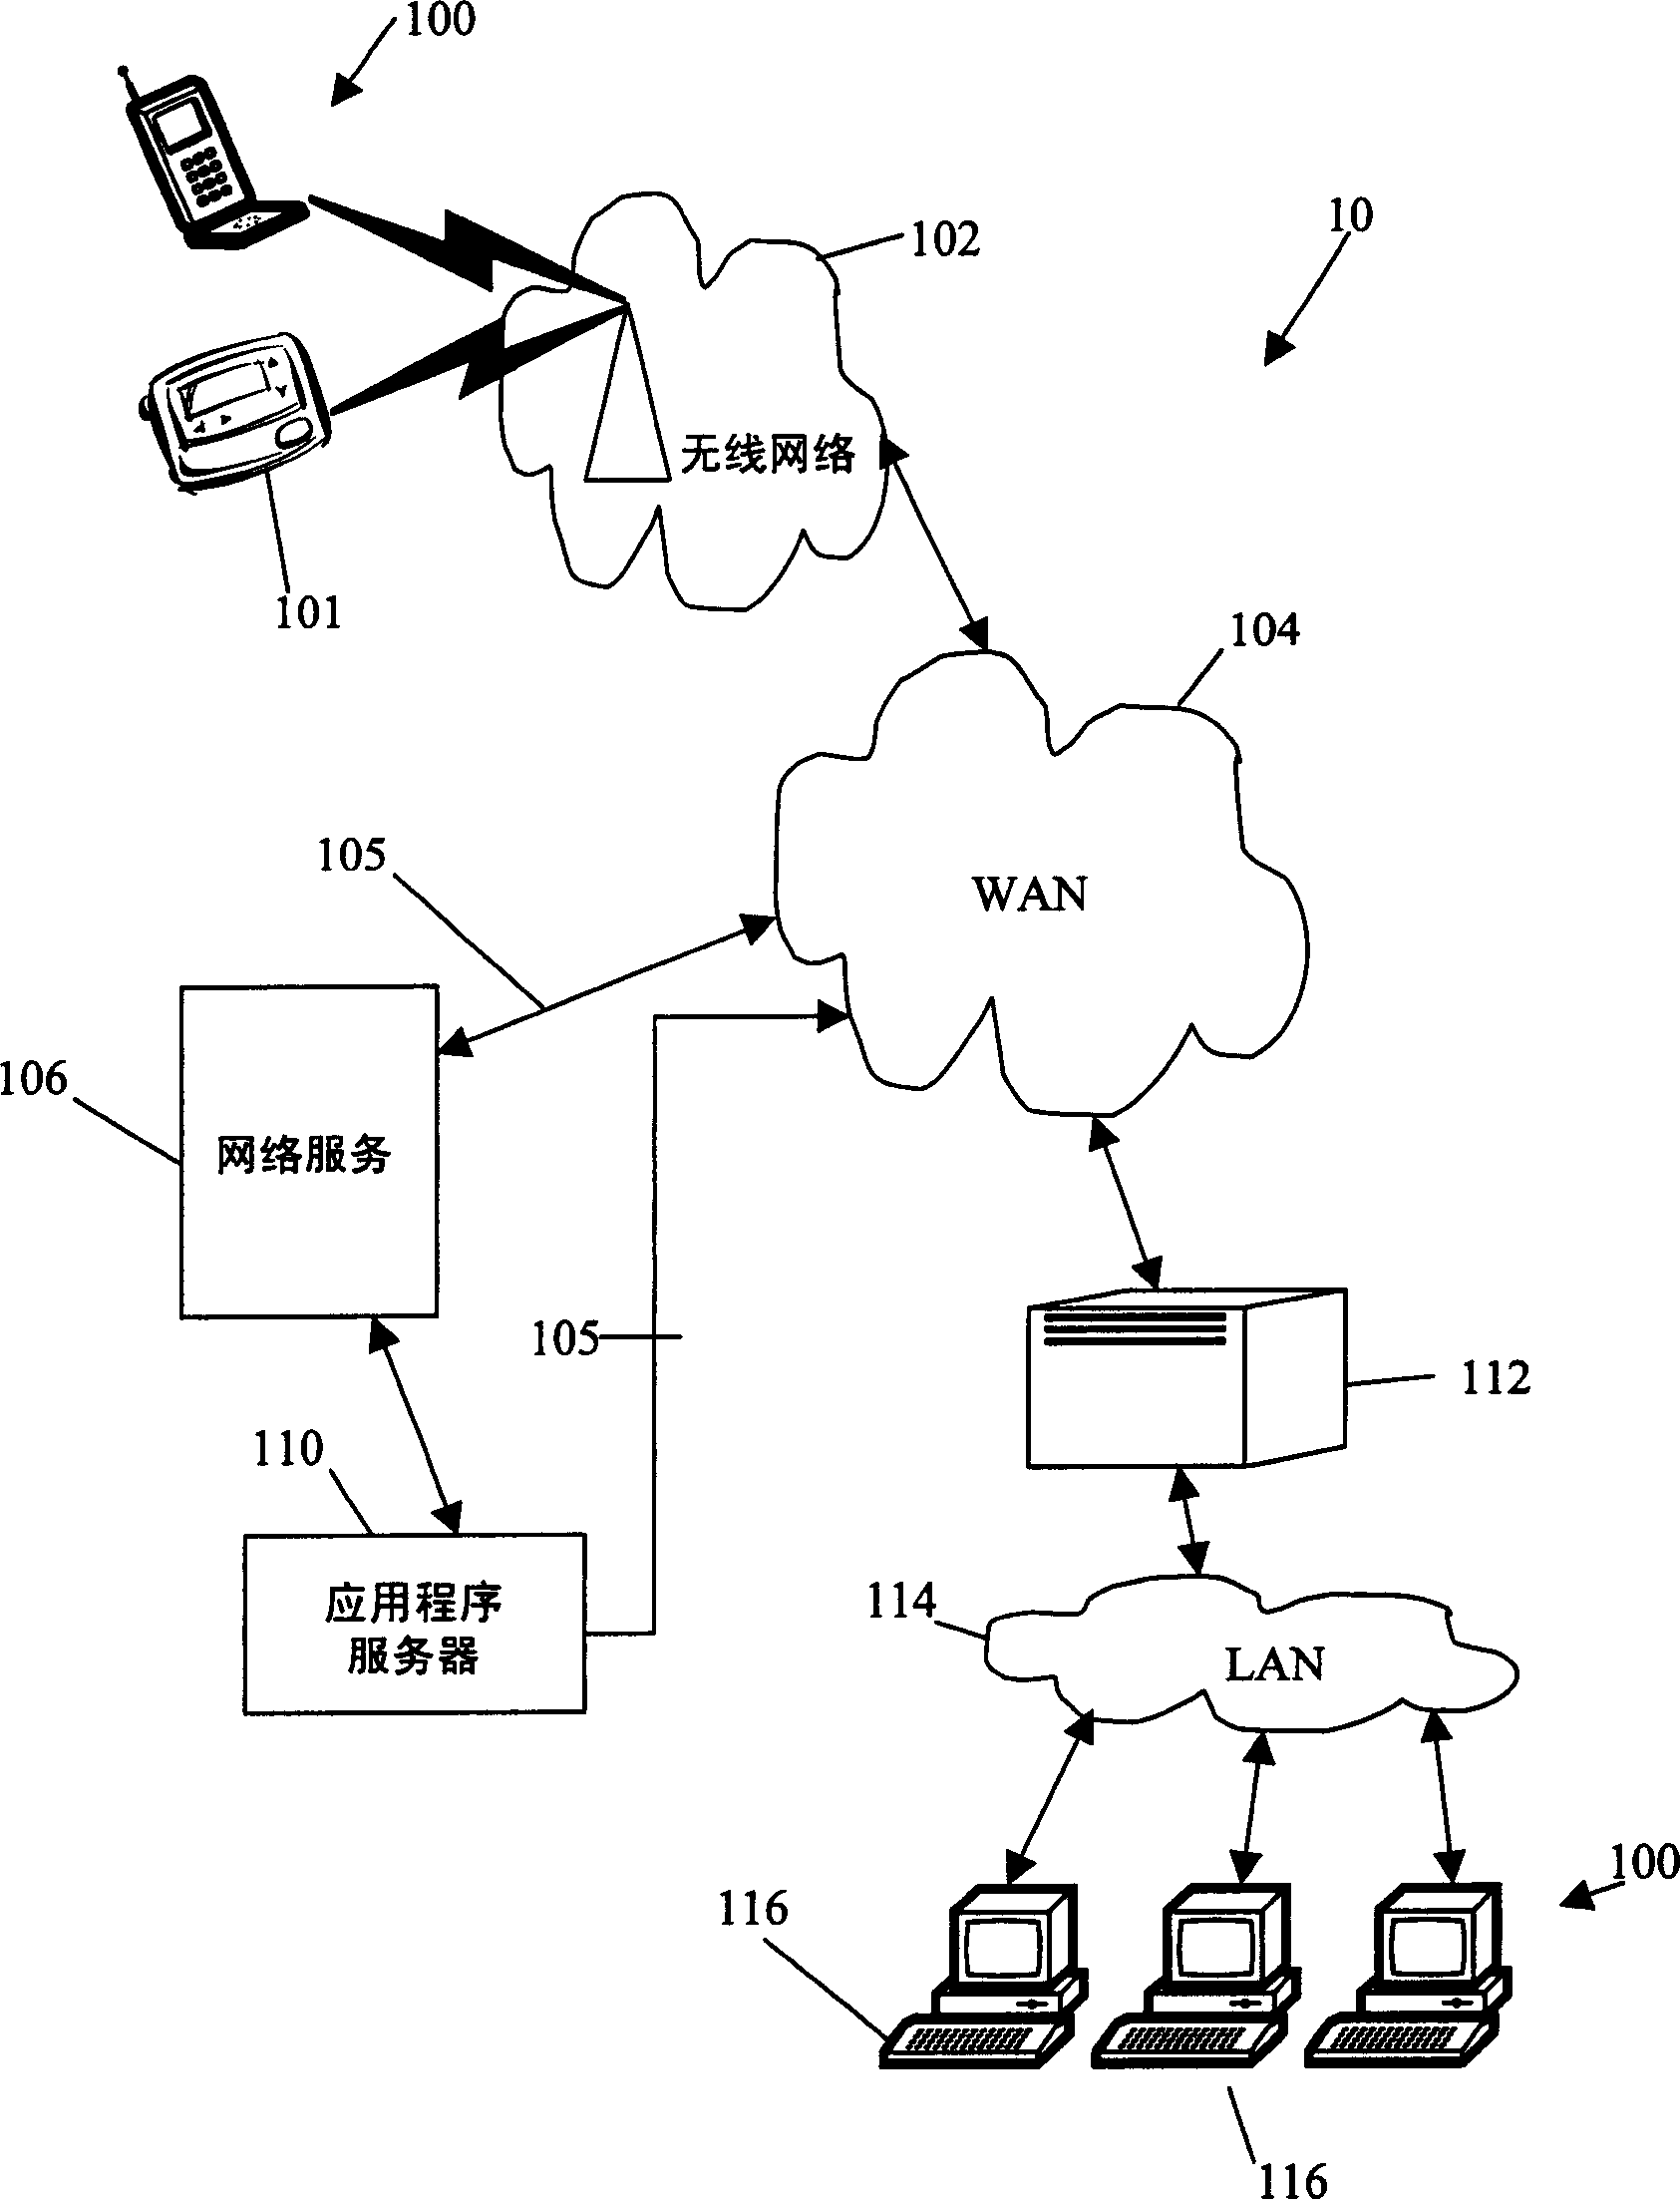 System and method for building component applications using metadata defined mapping between message and data domains